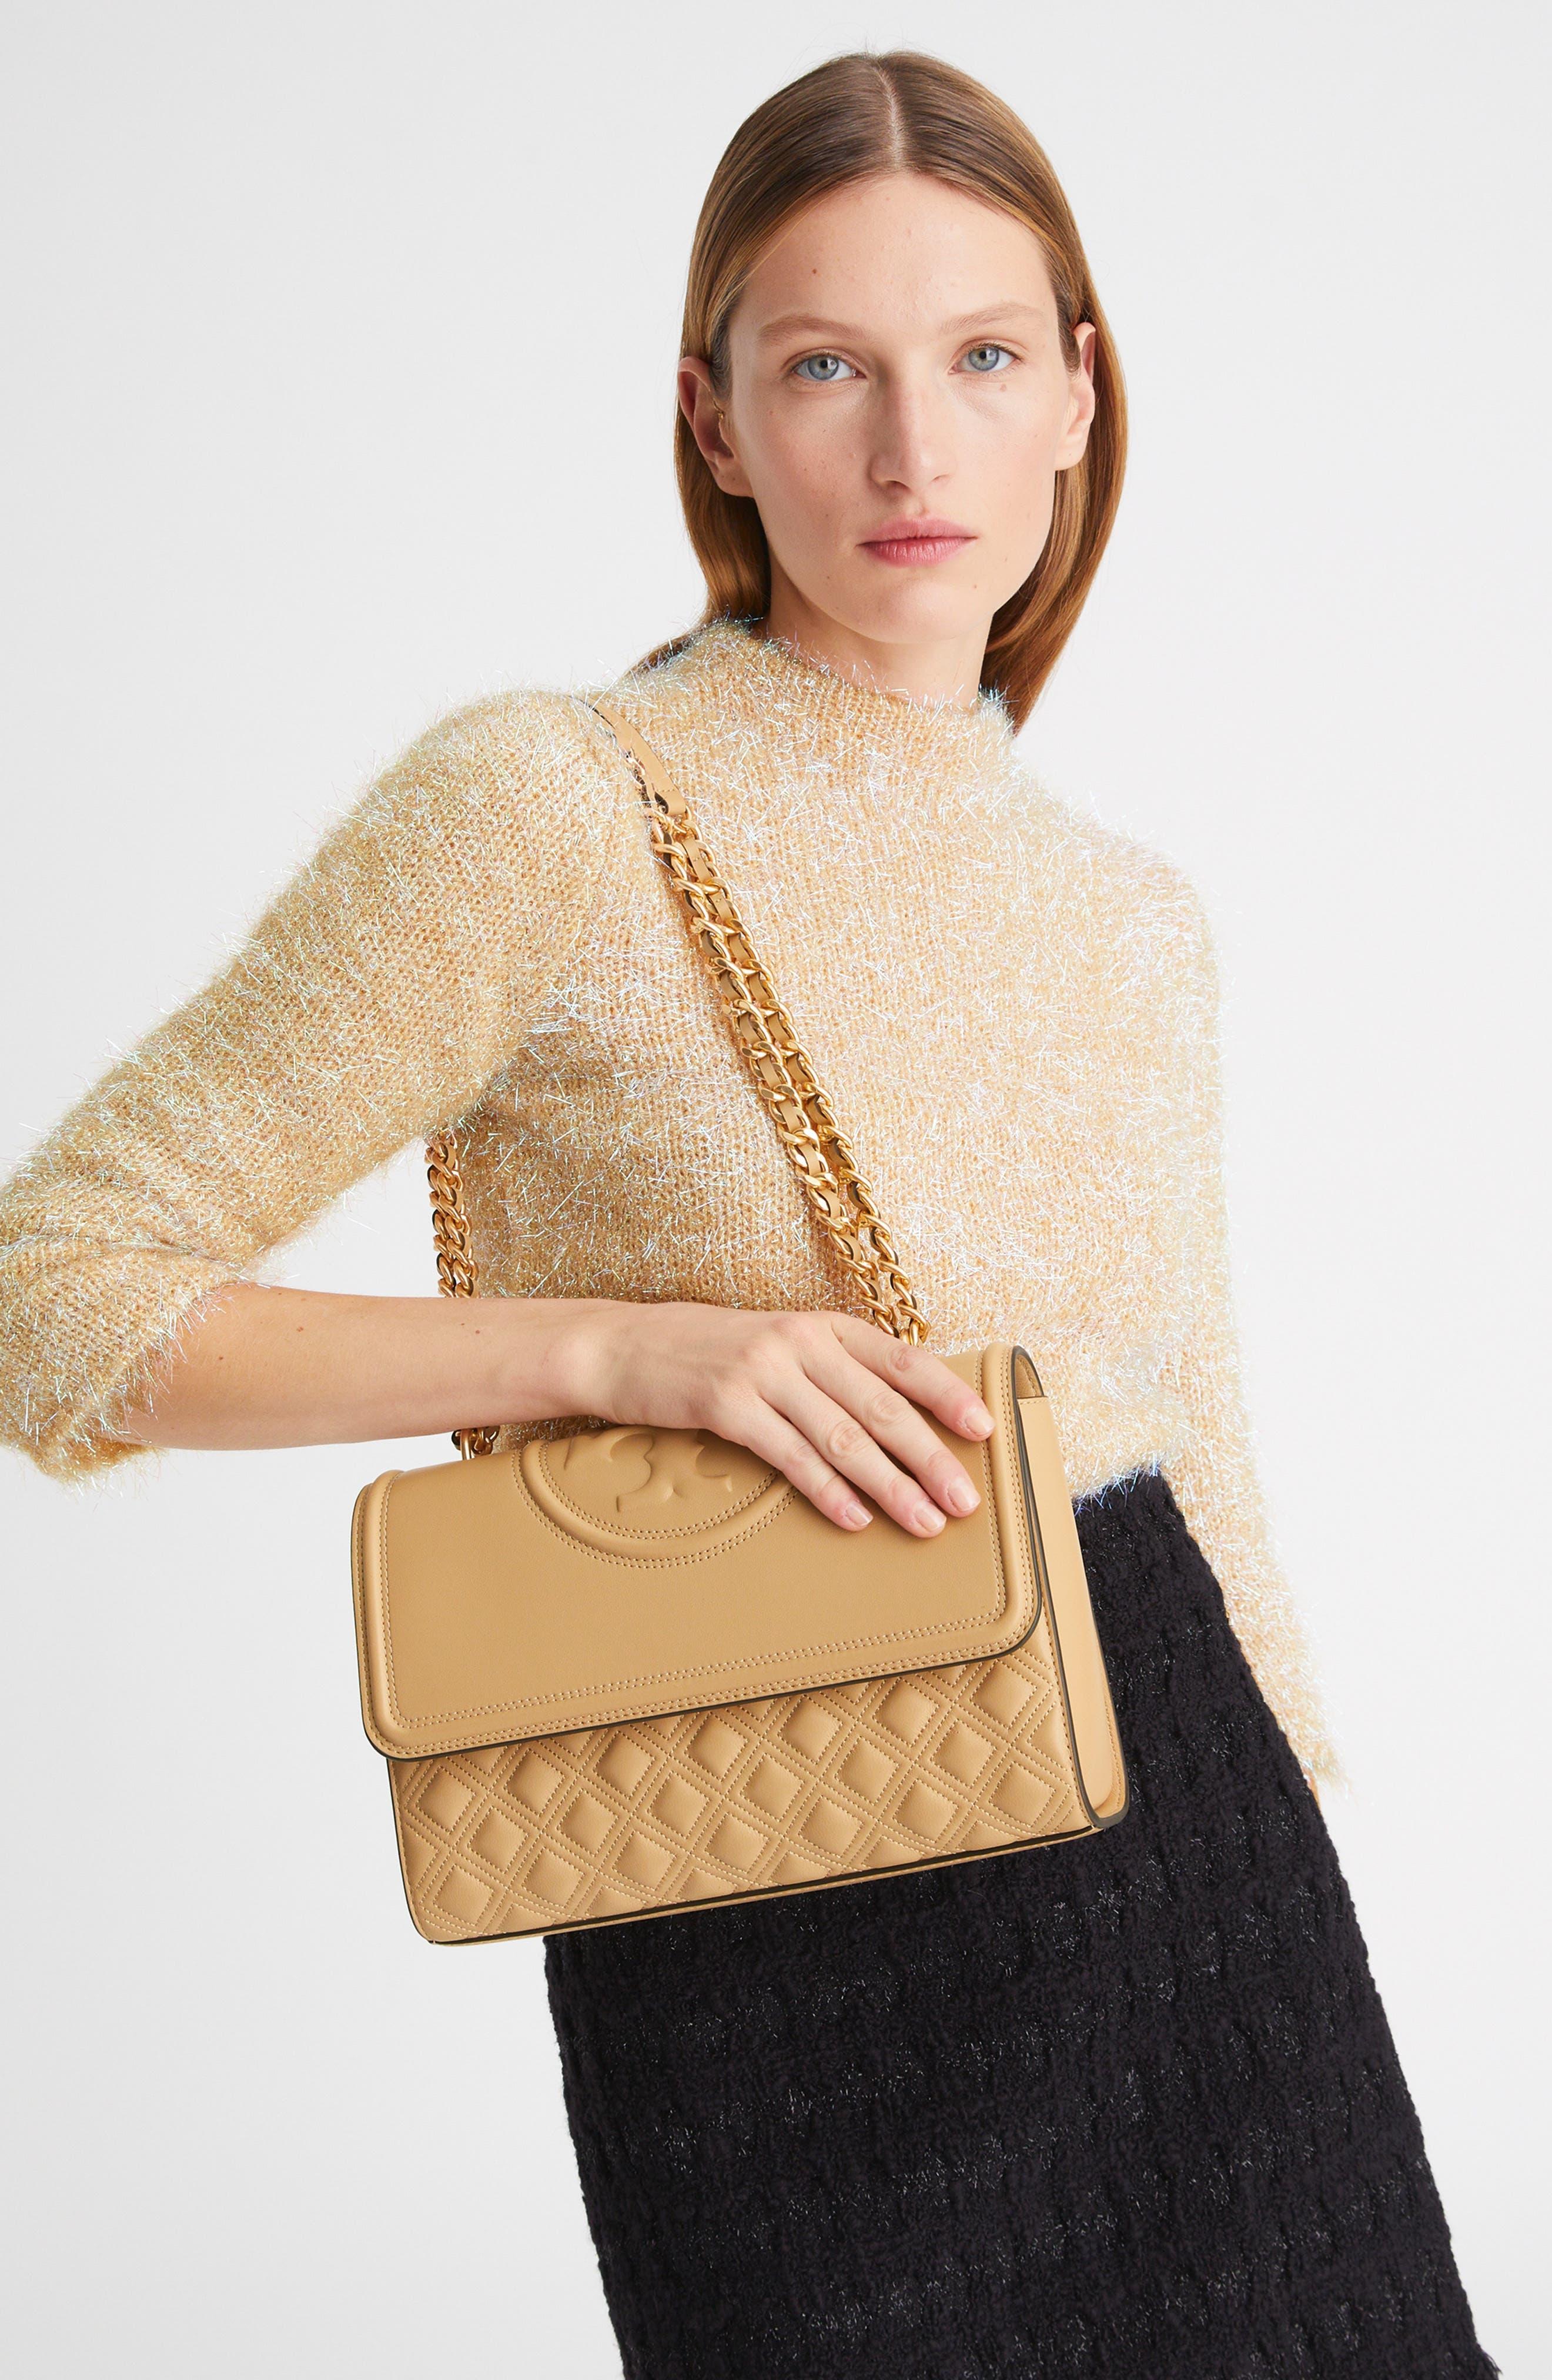 Tory Burch Fleming Leather Convertible Shoulder Bag in Natural | Lyst